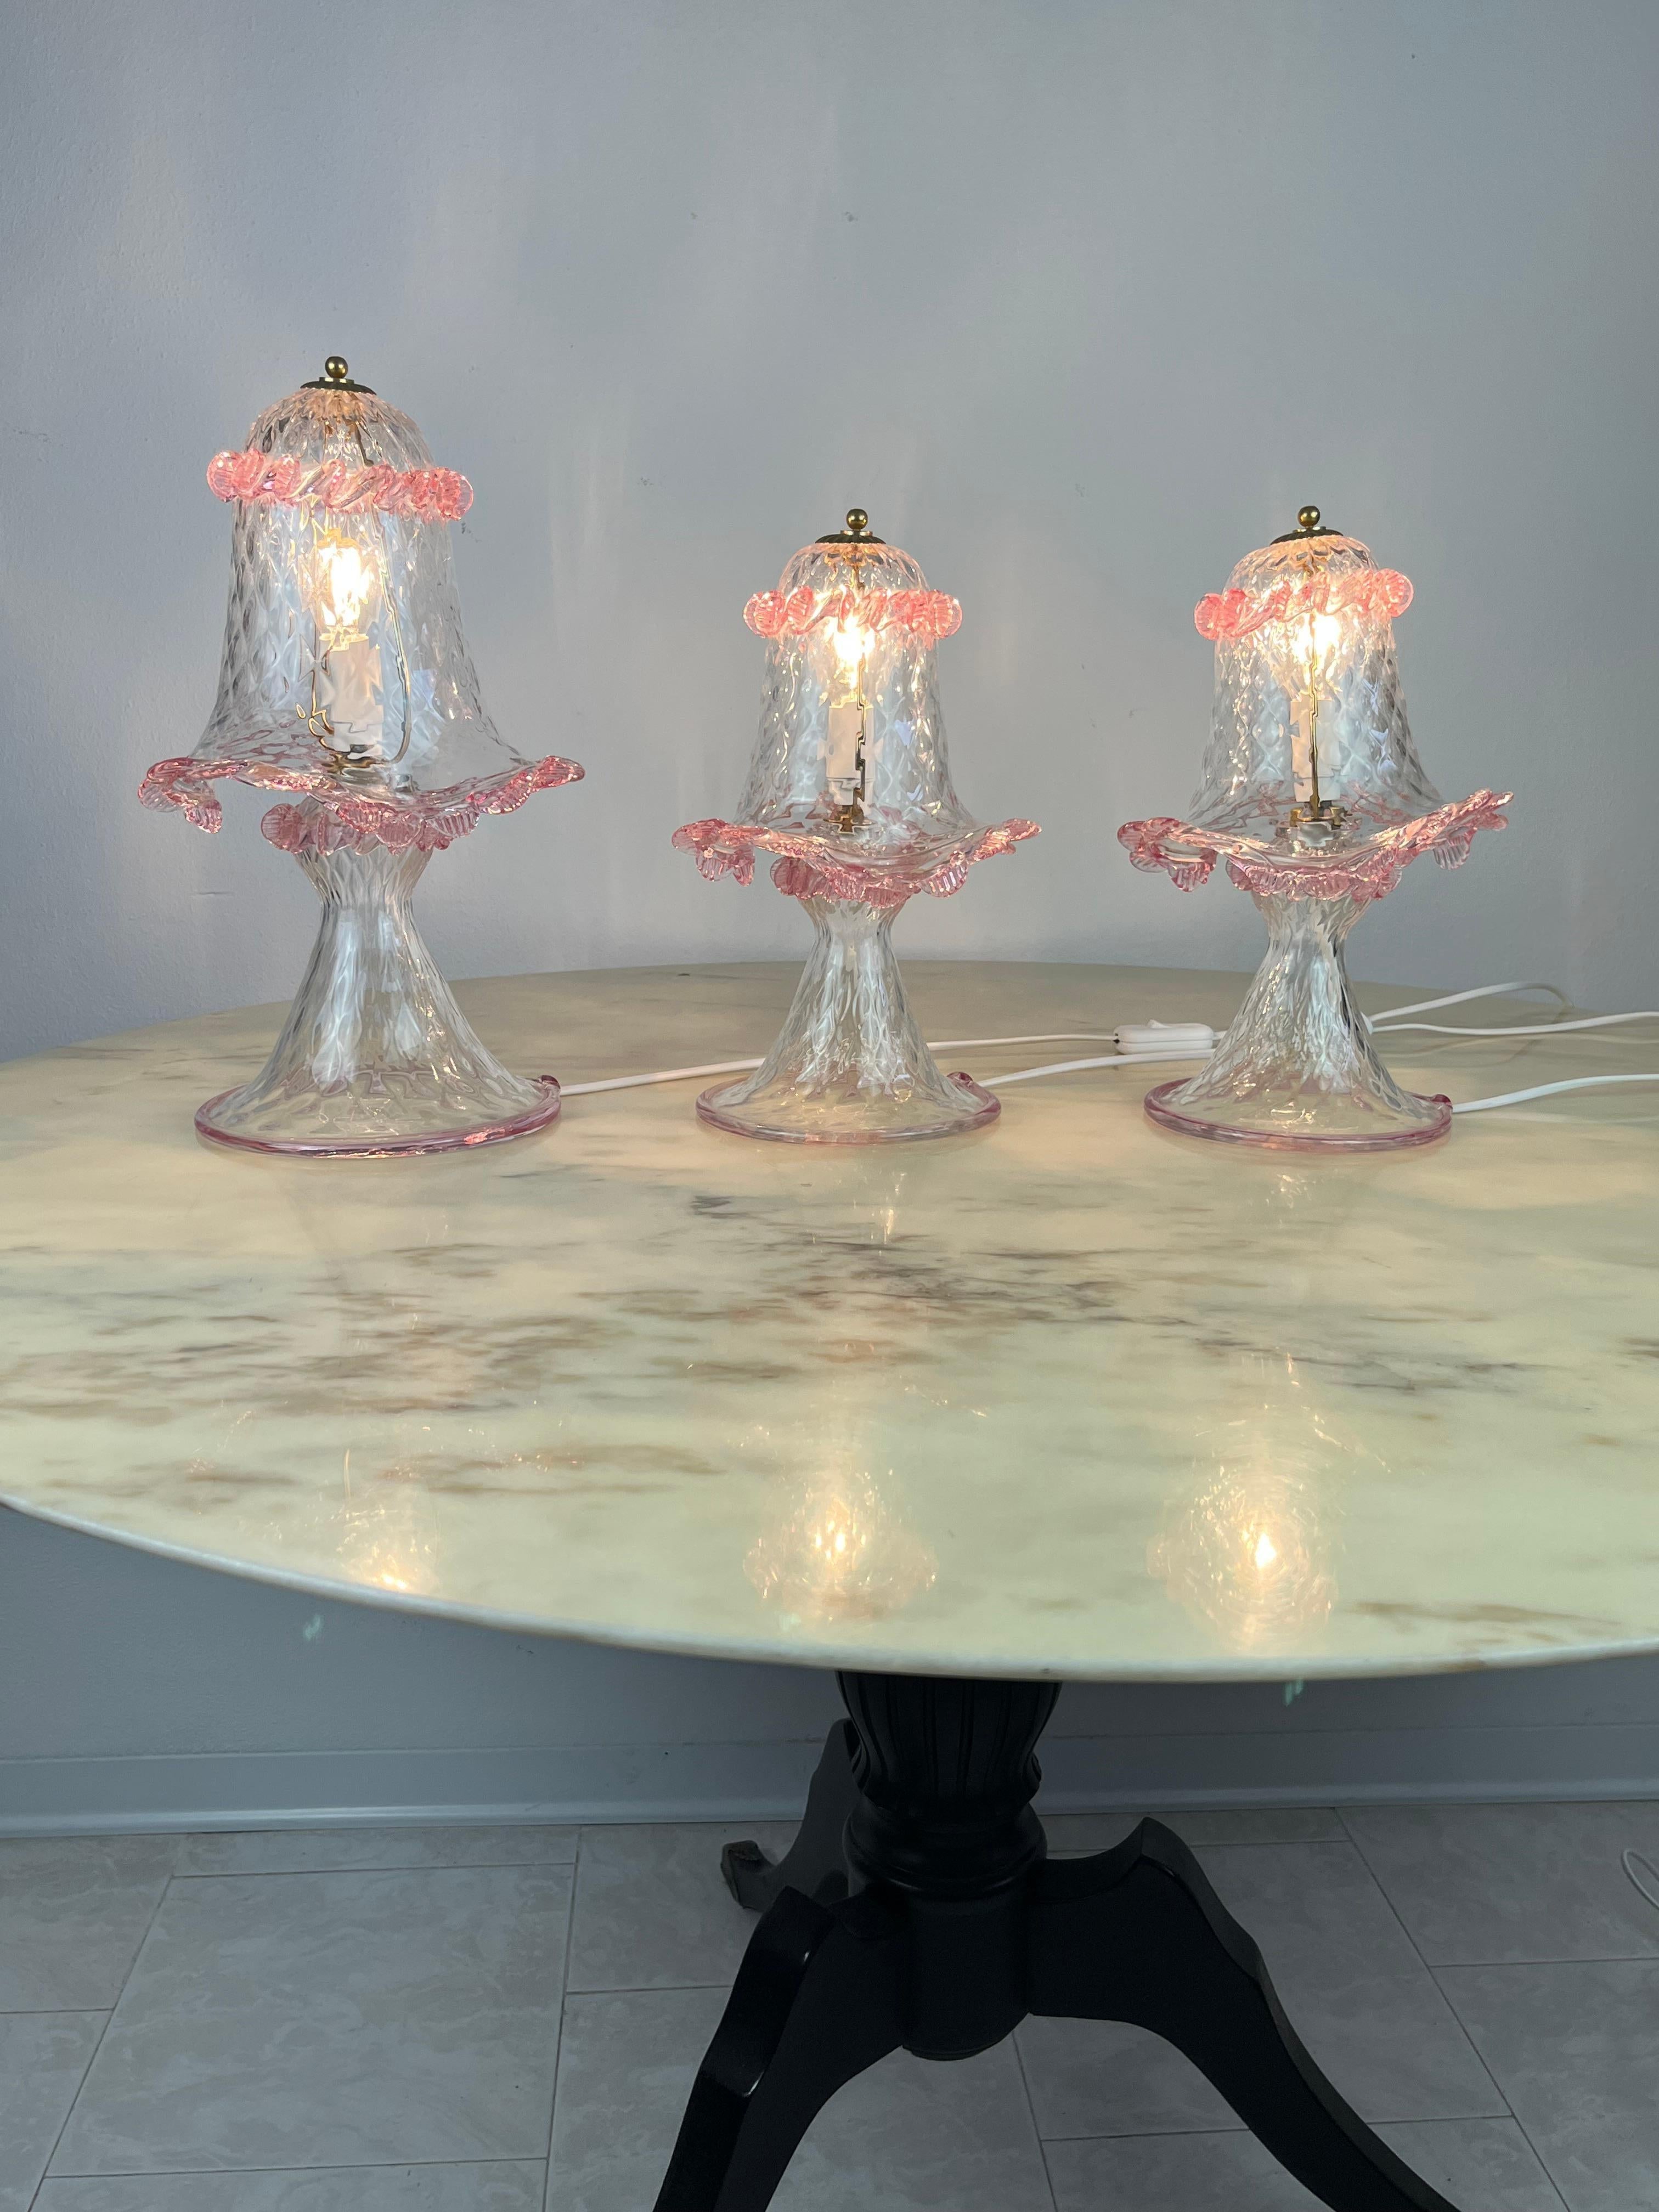 Set of three Murano lamps, Italy, 1980s.
Ideal for the bedroom.
The large one measures 38 cm and has a diameter of 22 cm. The two small ones, for bedside tables, Measure 30 cm with a diameter of 16.
Intact and functional, they are in excellent